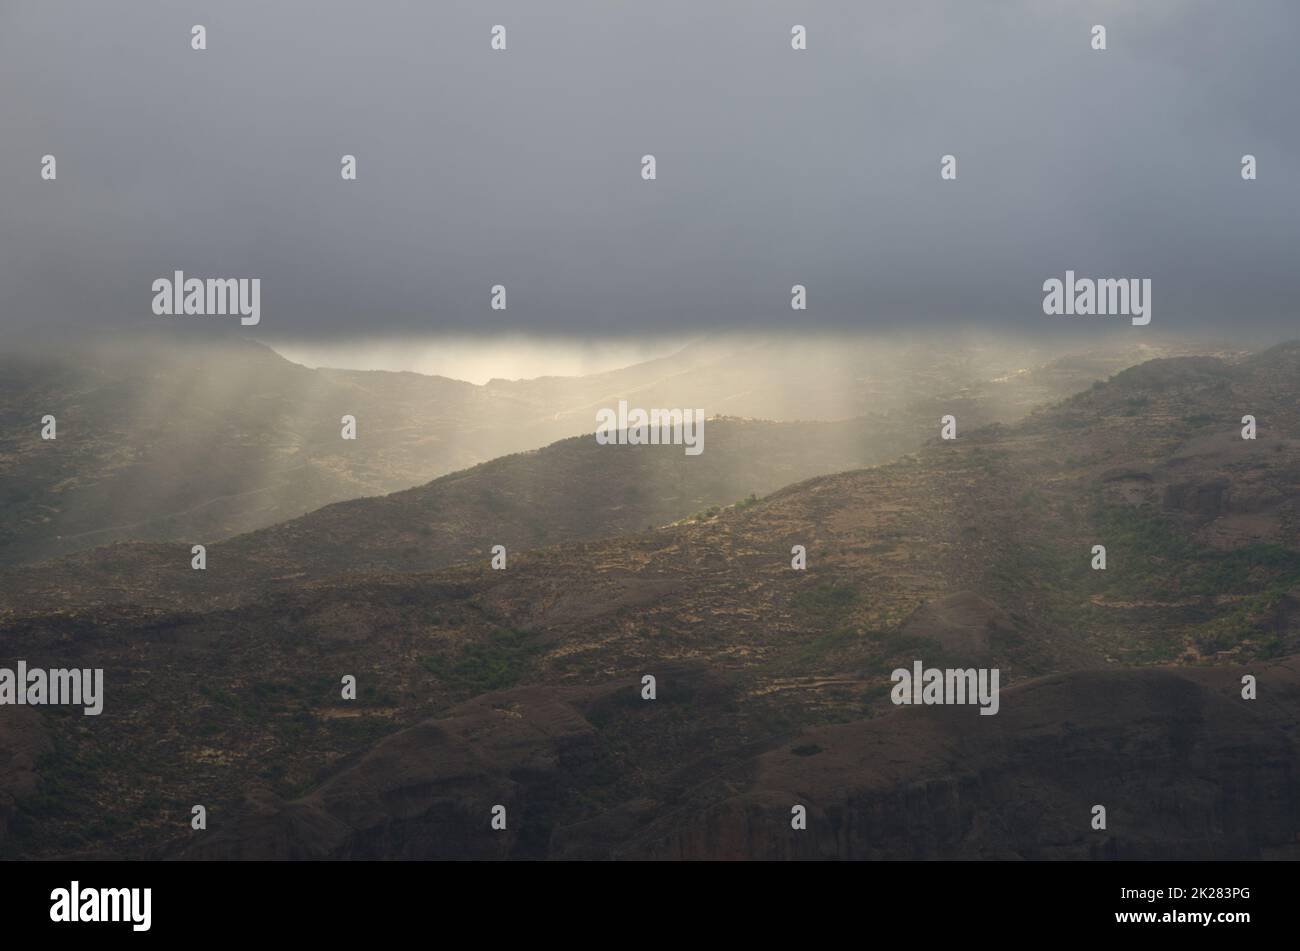 Lights illuminating the landscape on a stormy day. Stock Photo